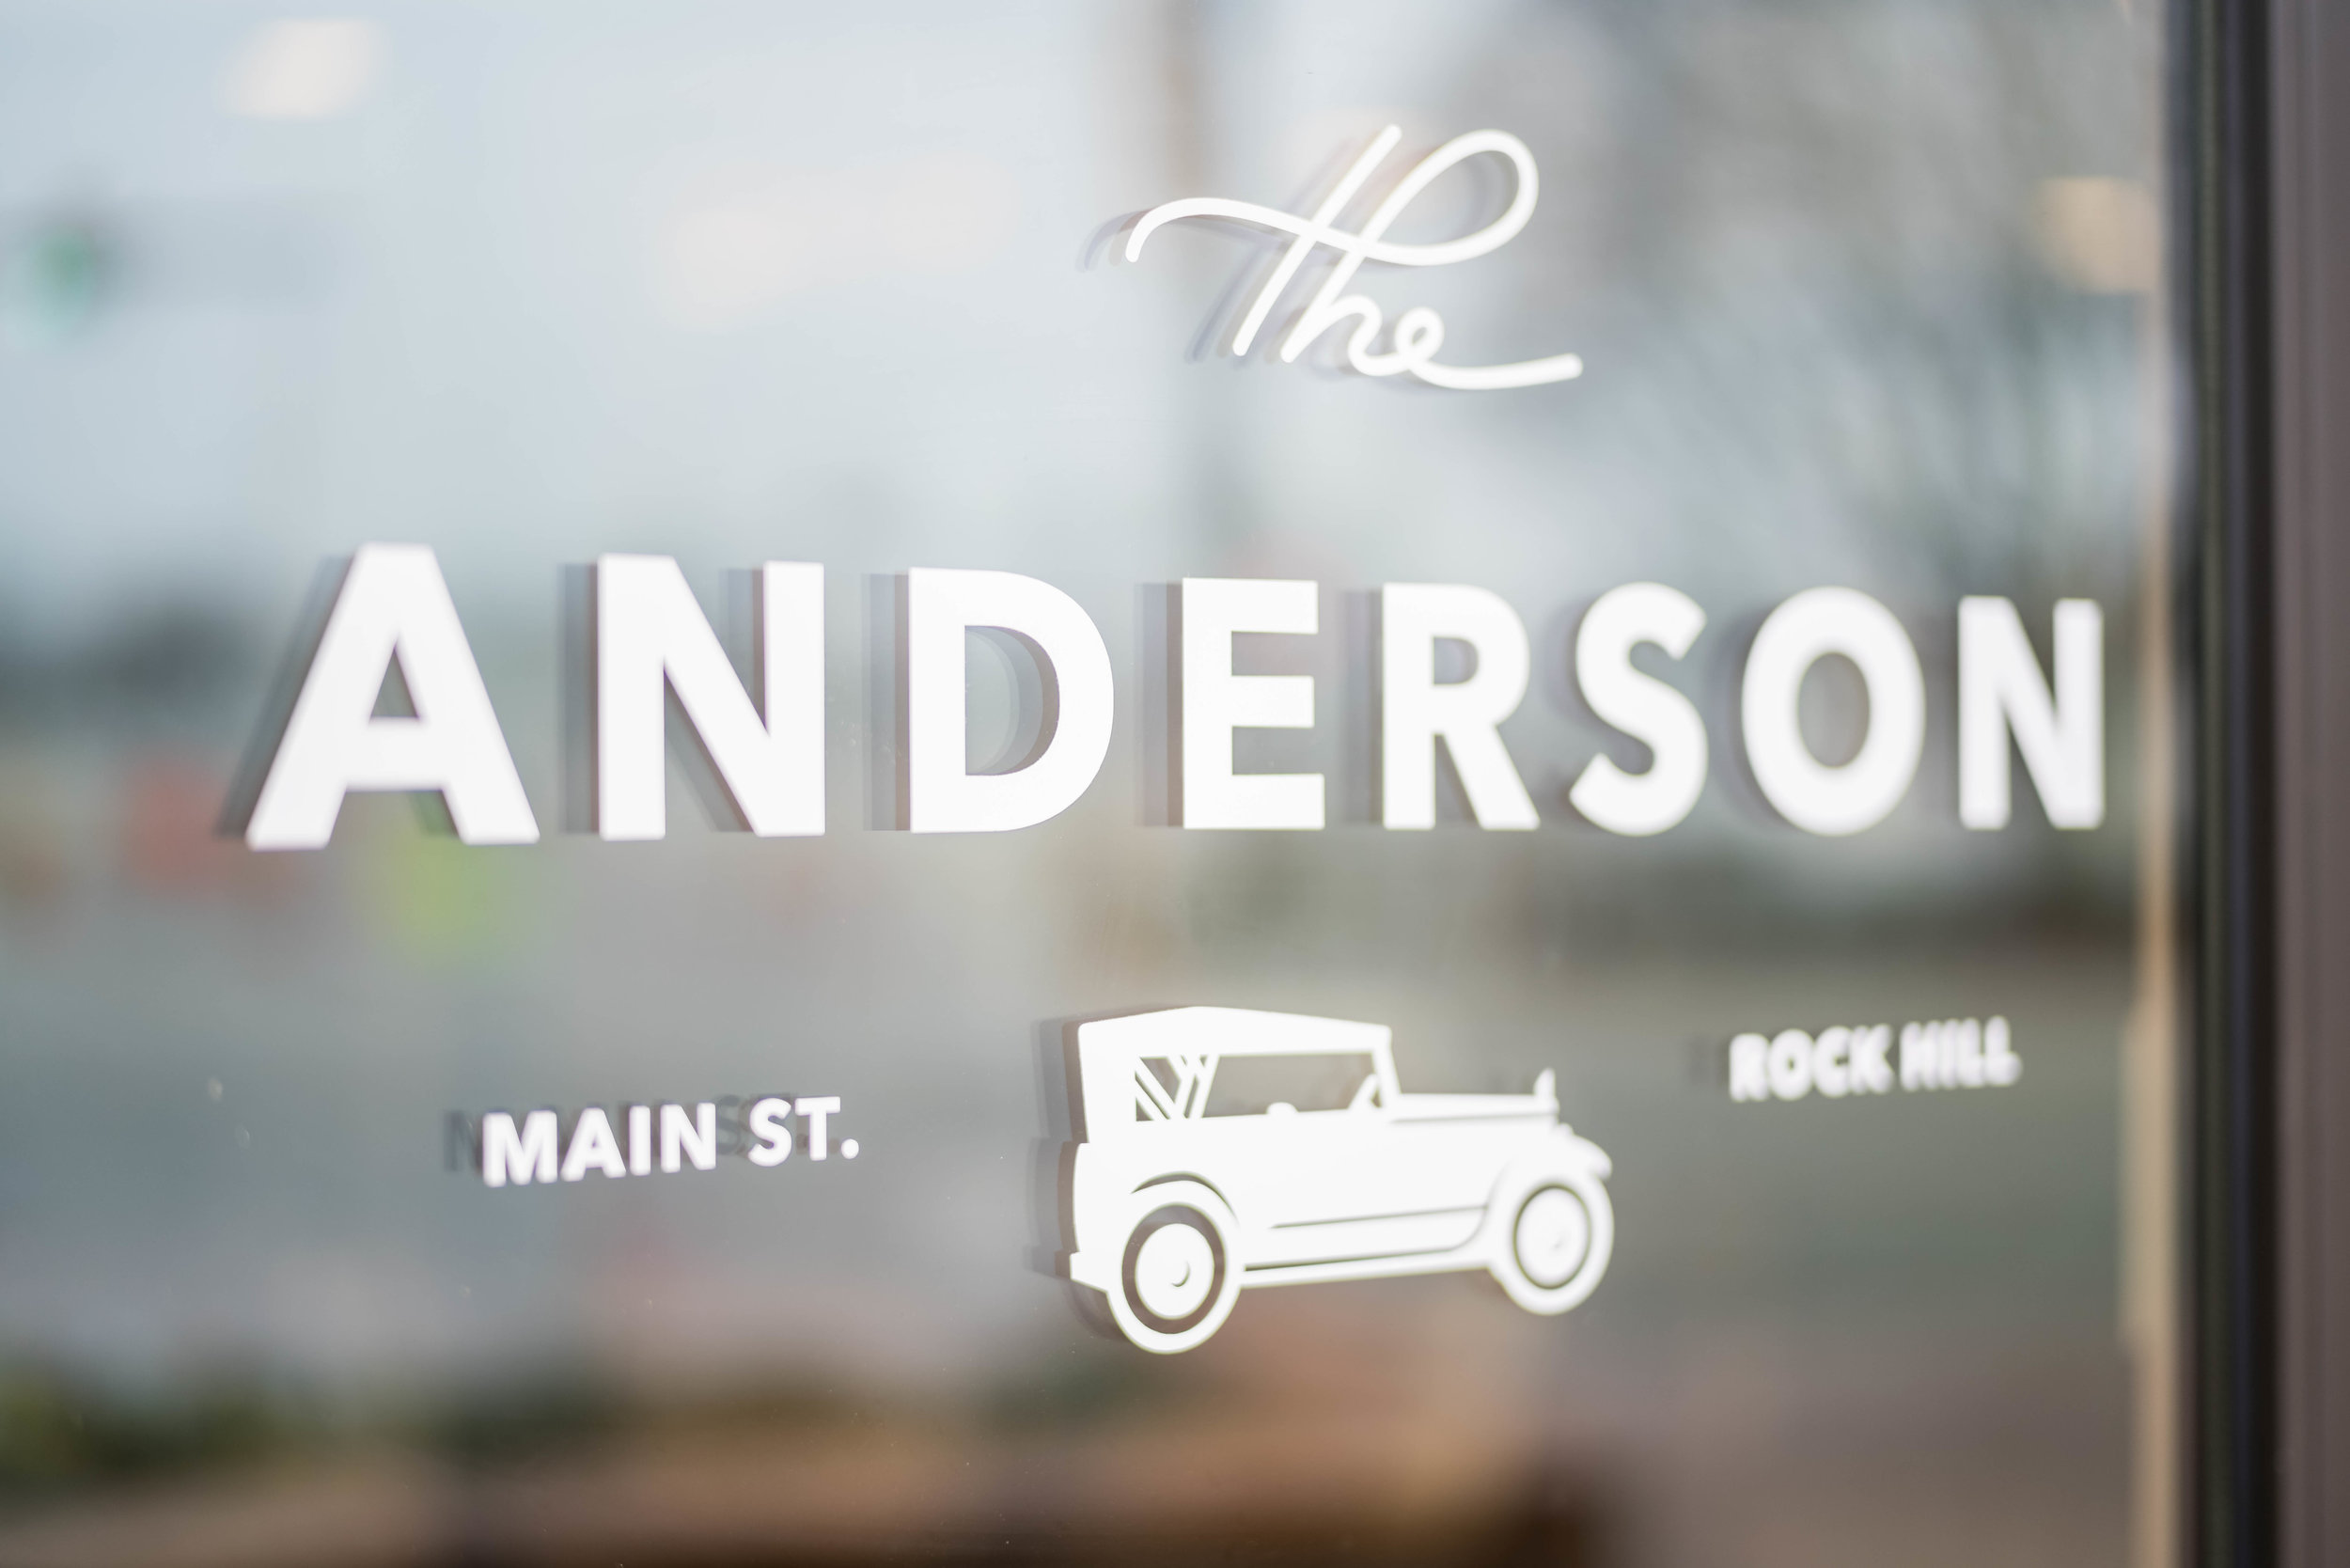 The Anderson-48.jpg